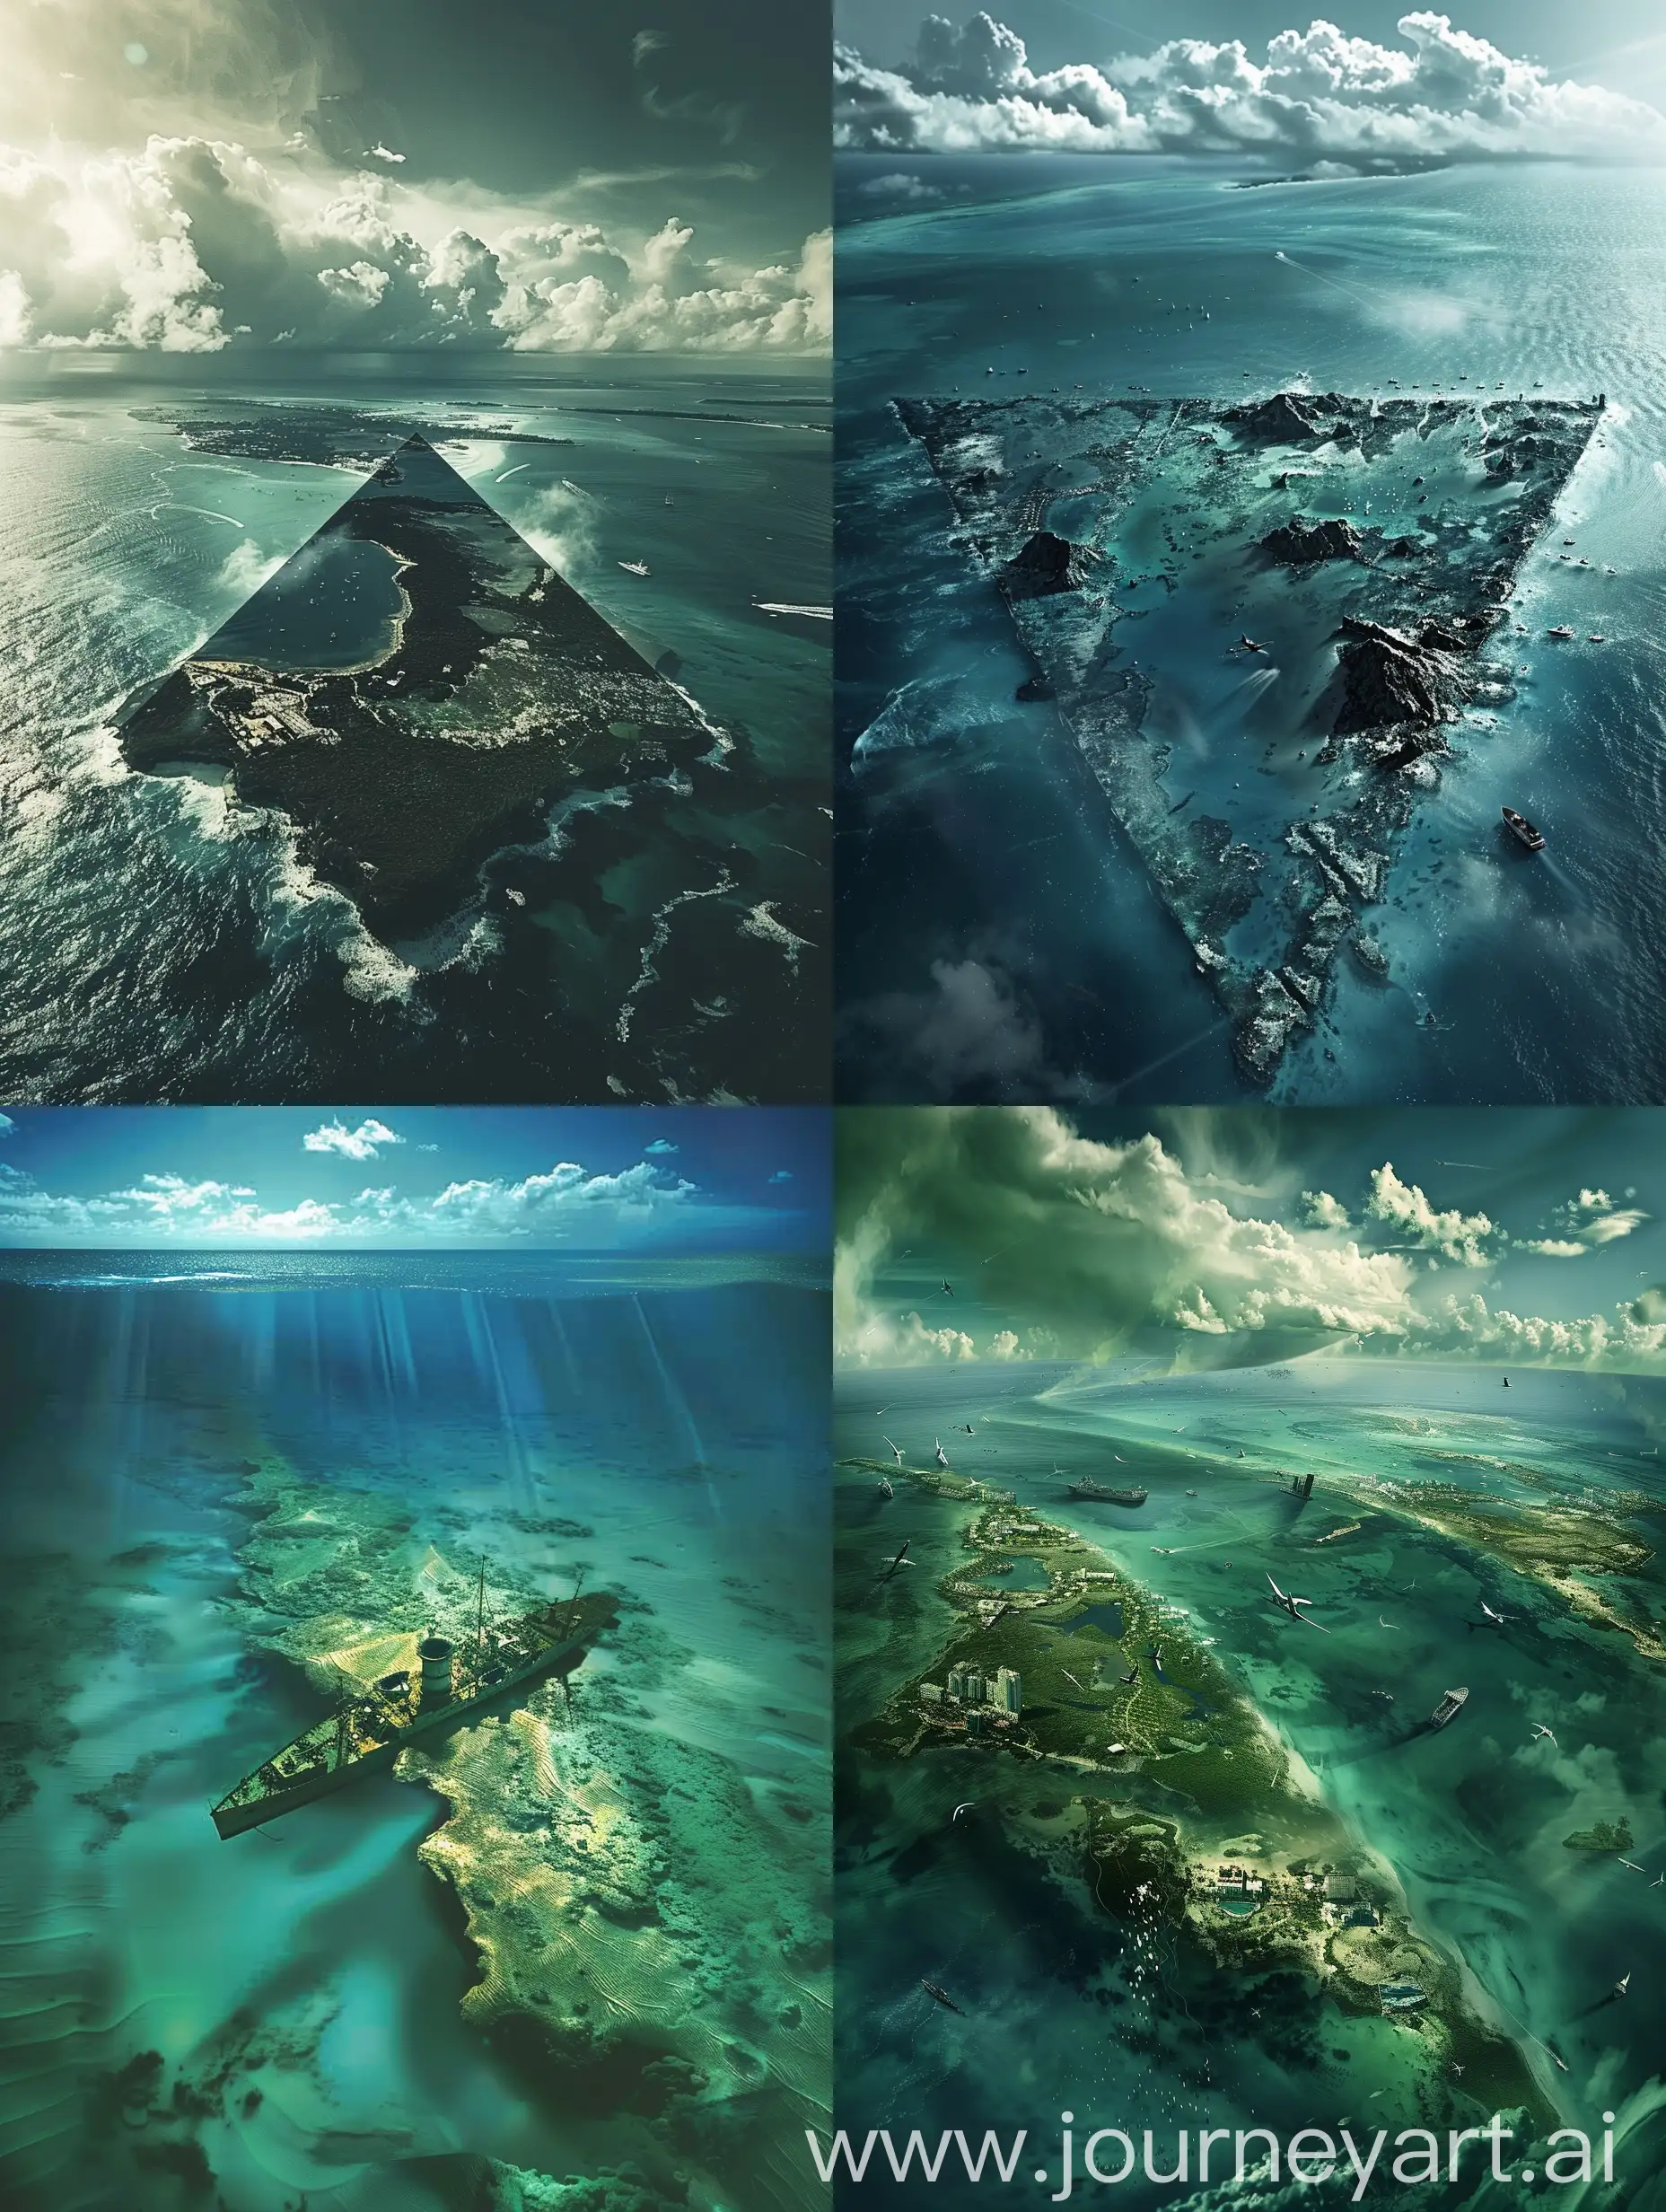 Mysterious-Bermuda-Triangle-Anomaly-Ships-and-Aircraft-Vanishing